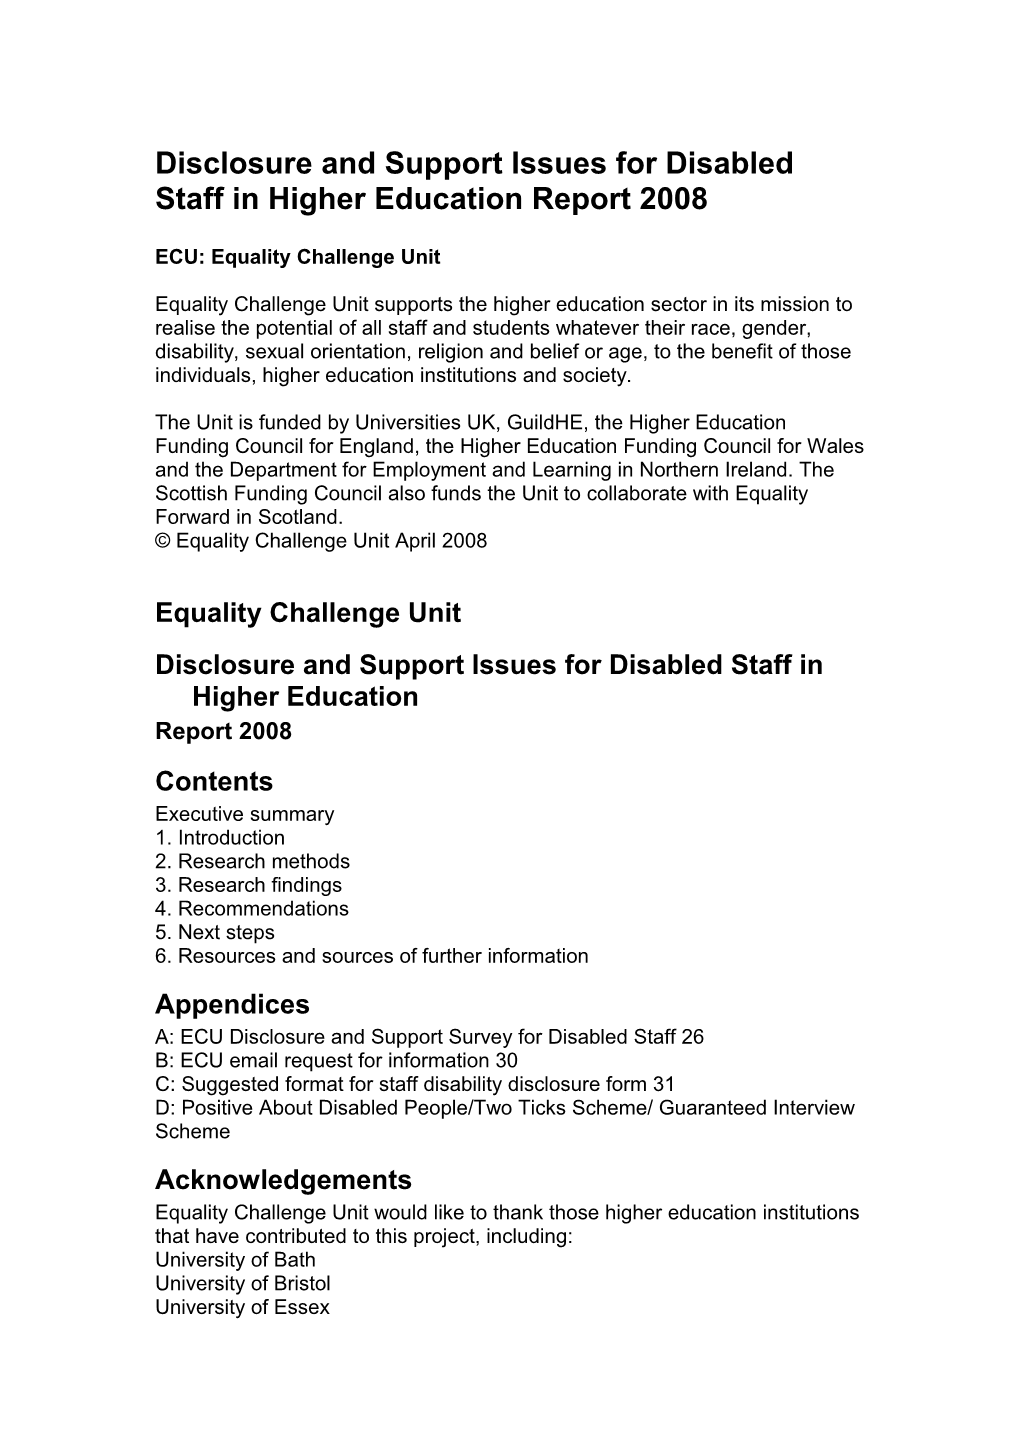 Disclosure and Support Issues for Disabled Staff in Higher Education Report 2008